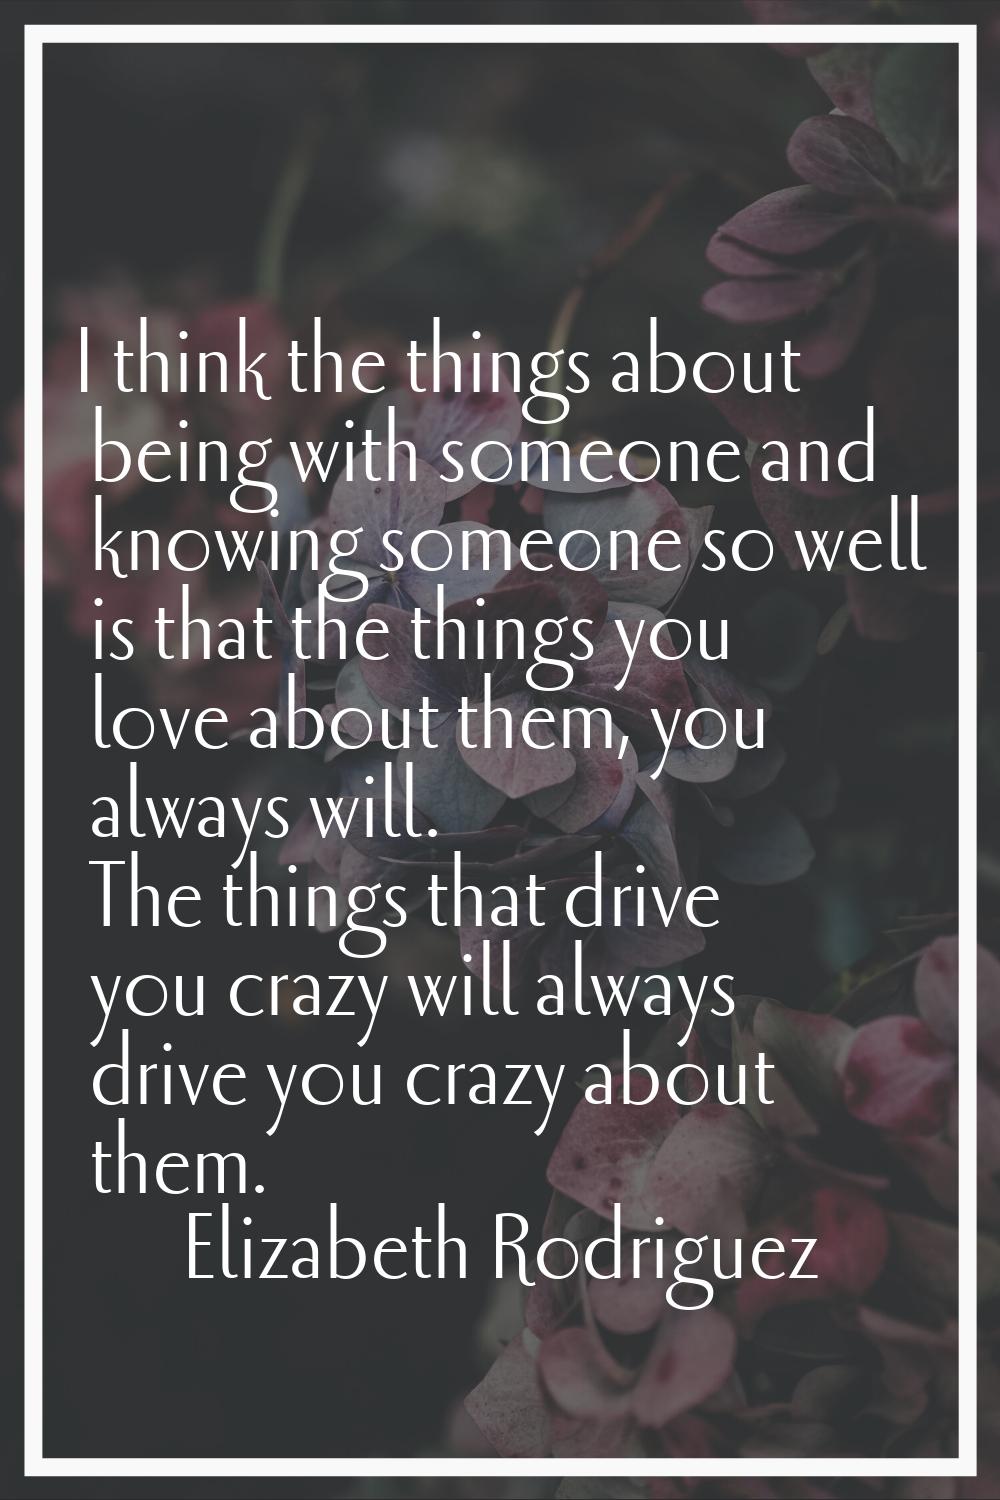 I think the things about being with someone and knowing someone so well is that the things you love